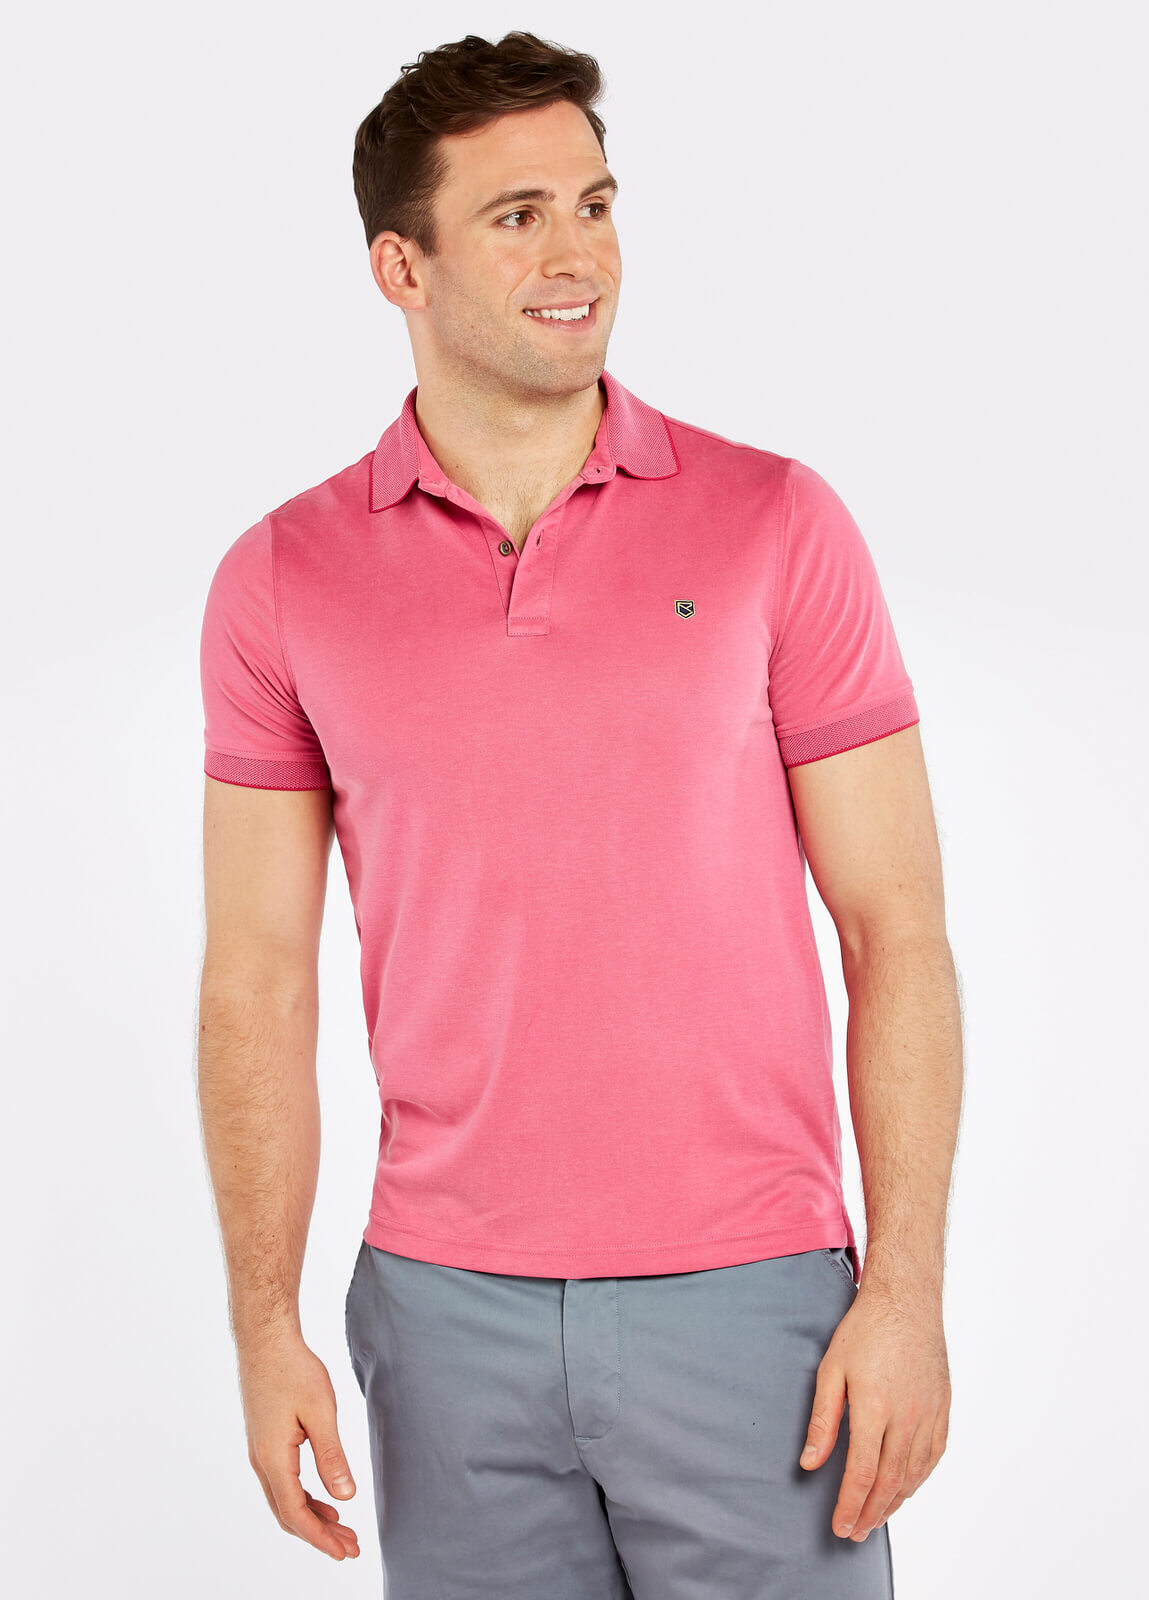 Rockrook Polo Shirt - Orchid